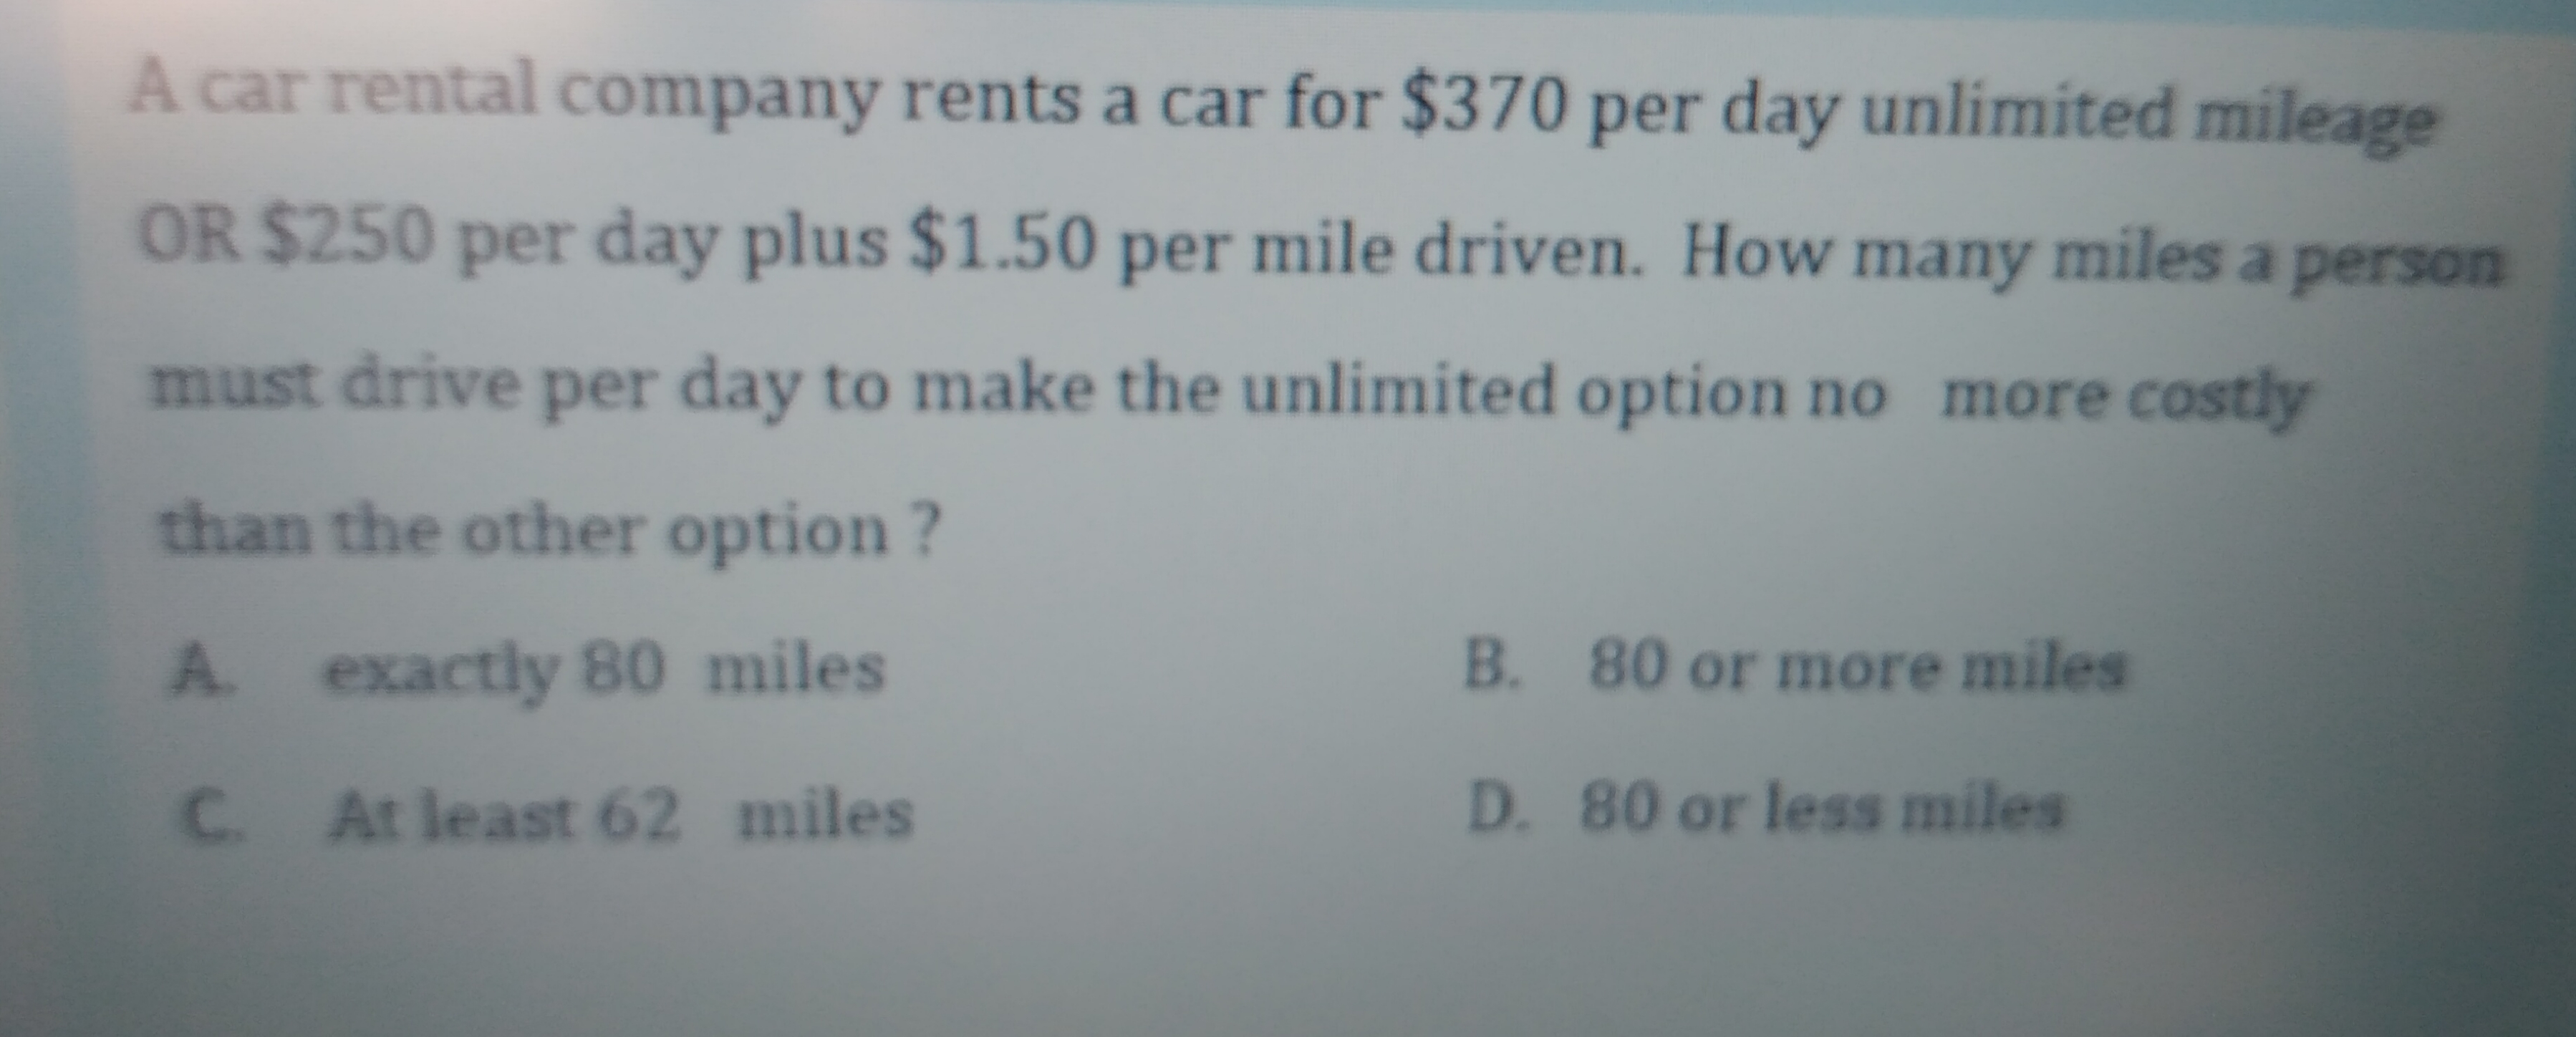 A car rental company rents a car for $370 per day unlimited mileage
OR $250 per day plus $1.50 per mile driven. How many miles a person
must drive per day to make the unlimited option no more costly
than the other option ?
A exactly 80 miles
B. 80 or more miles
C At least 62 miles
D. 80 or less miles
